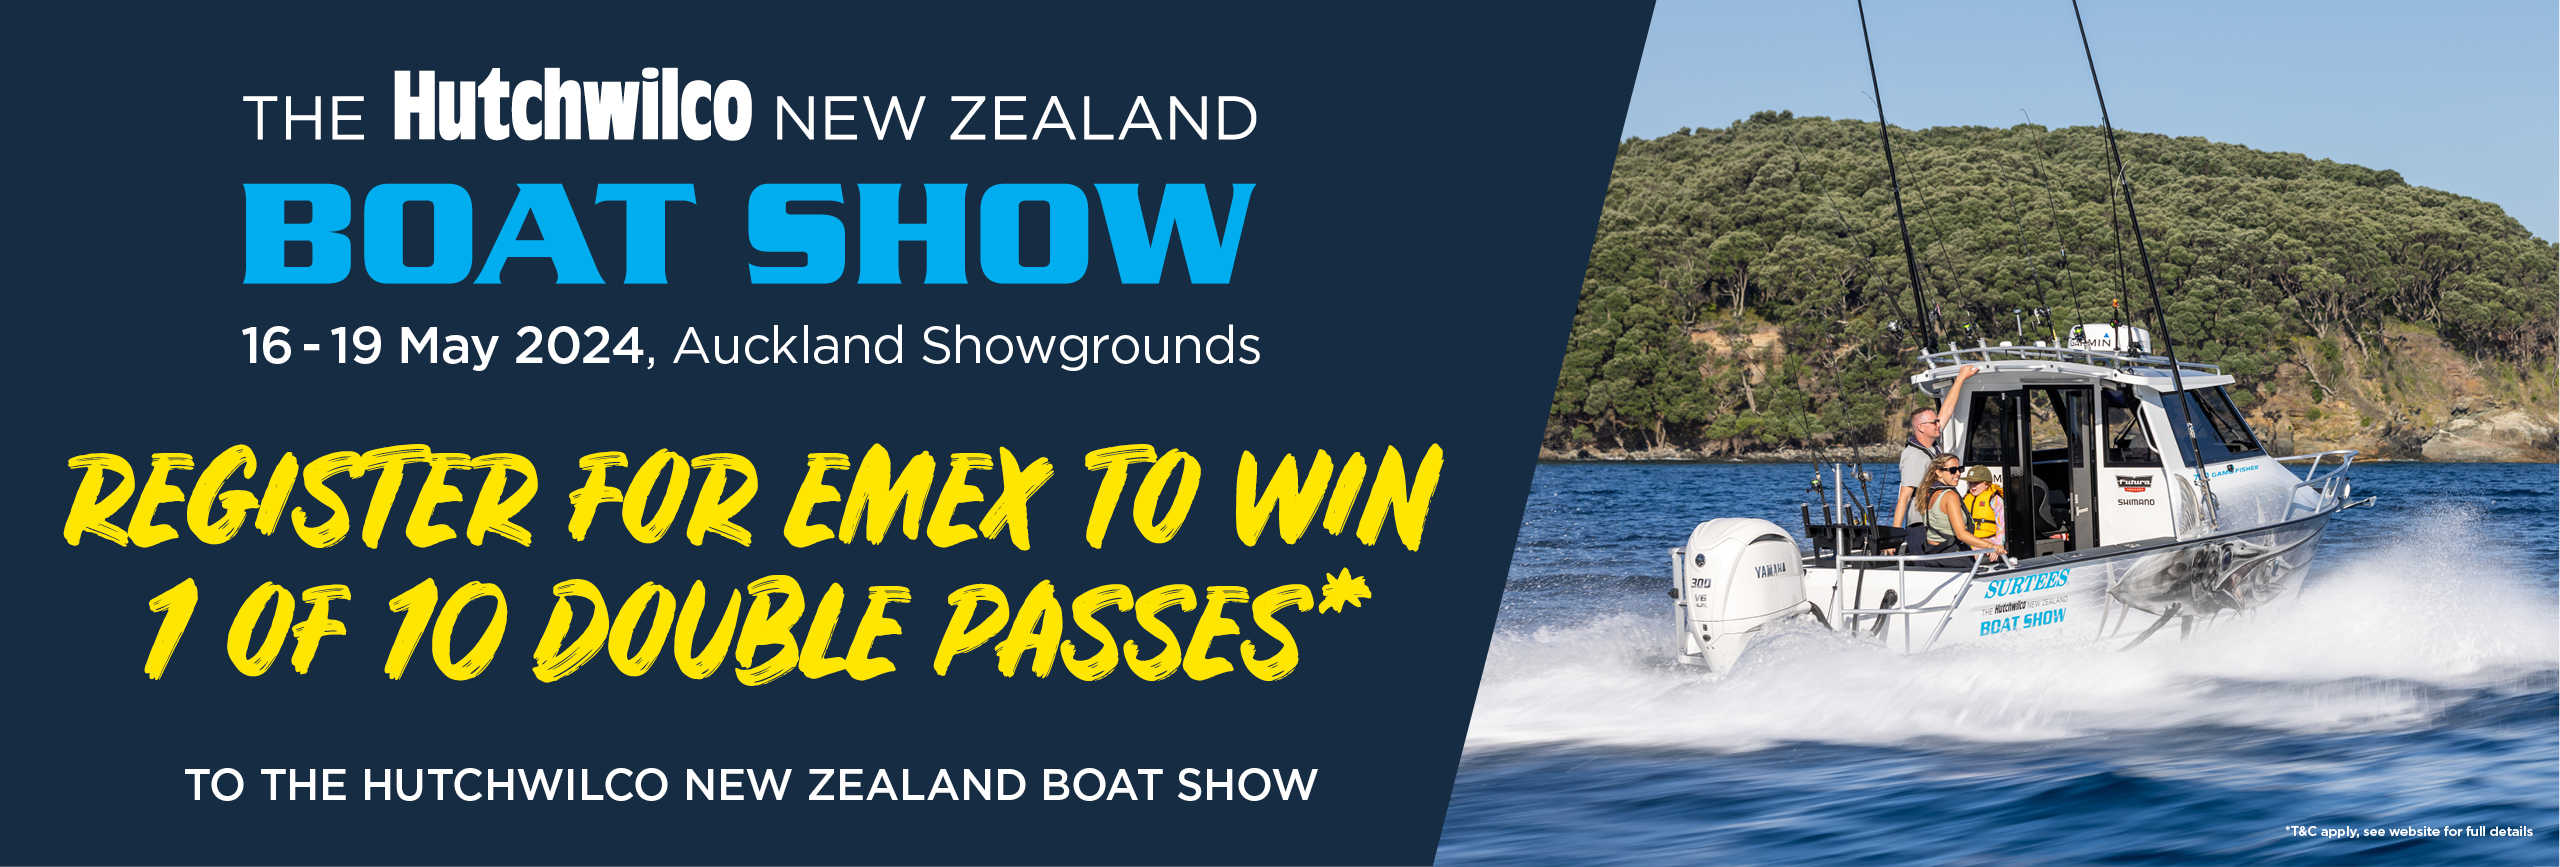 The Boat Show Offer